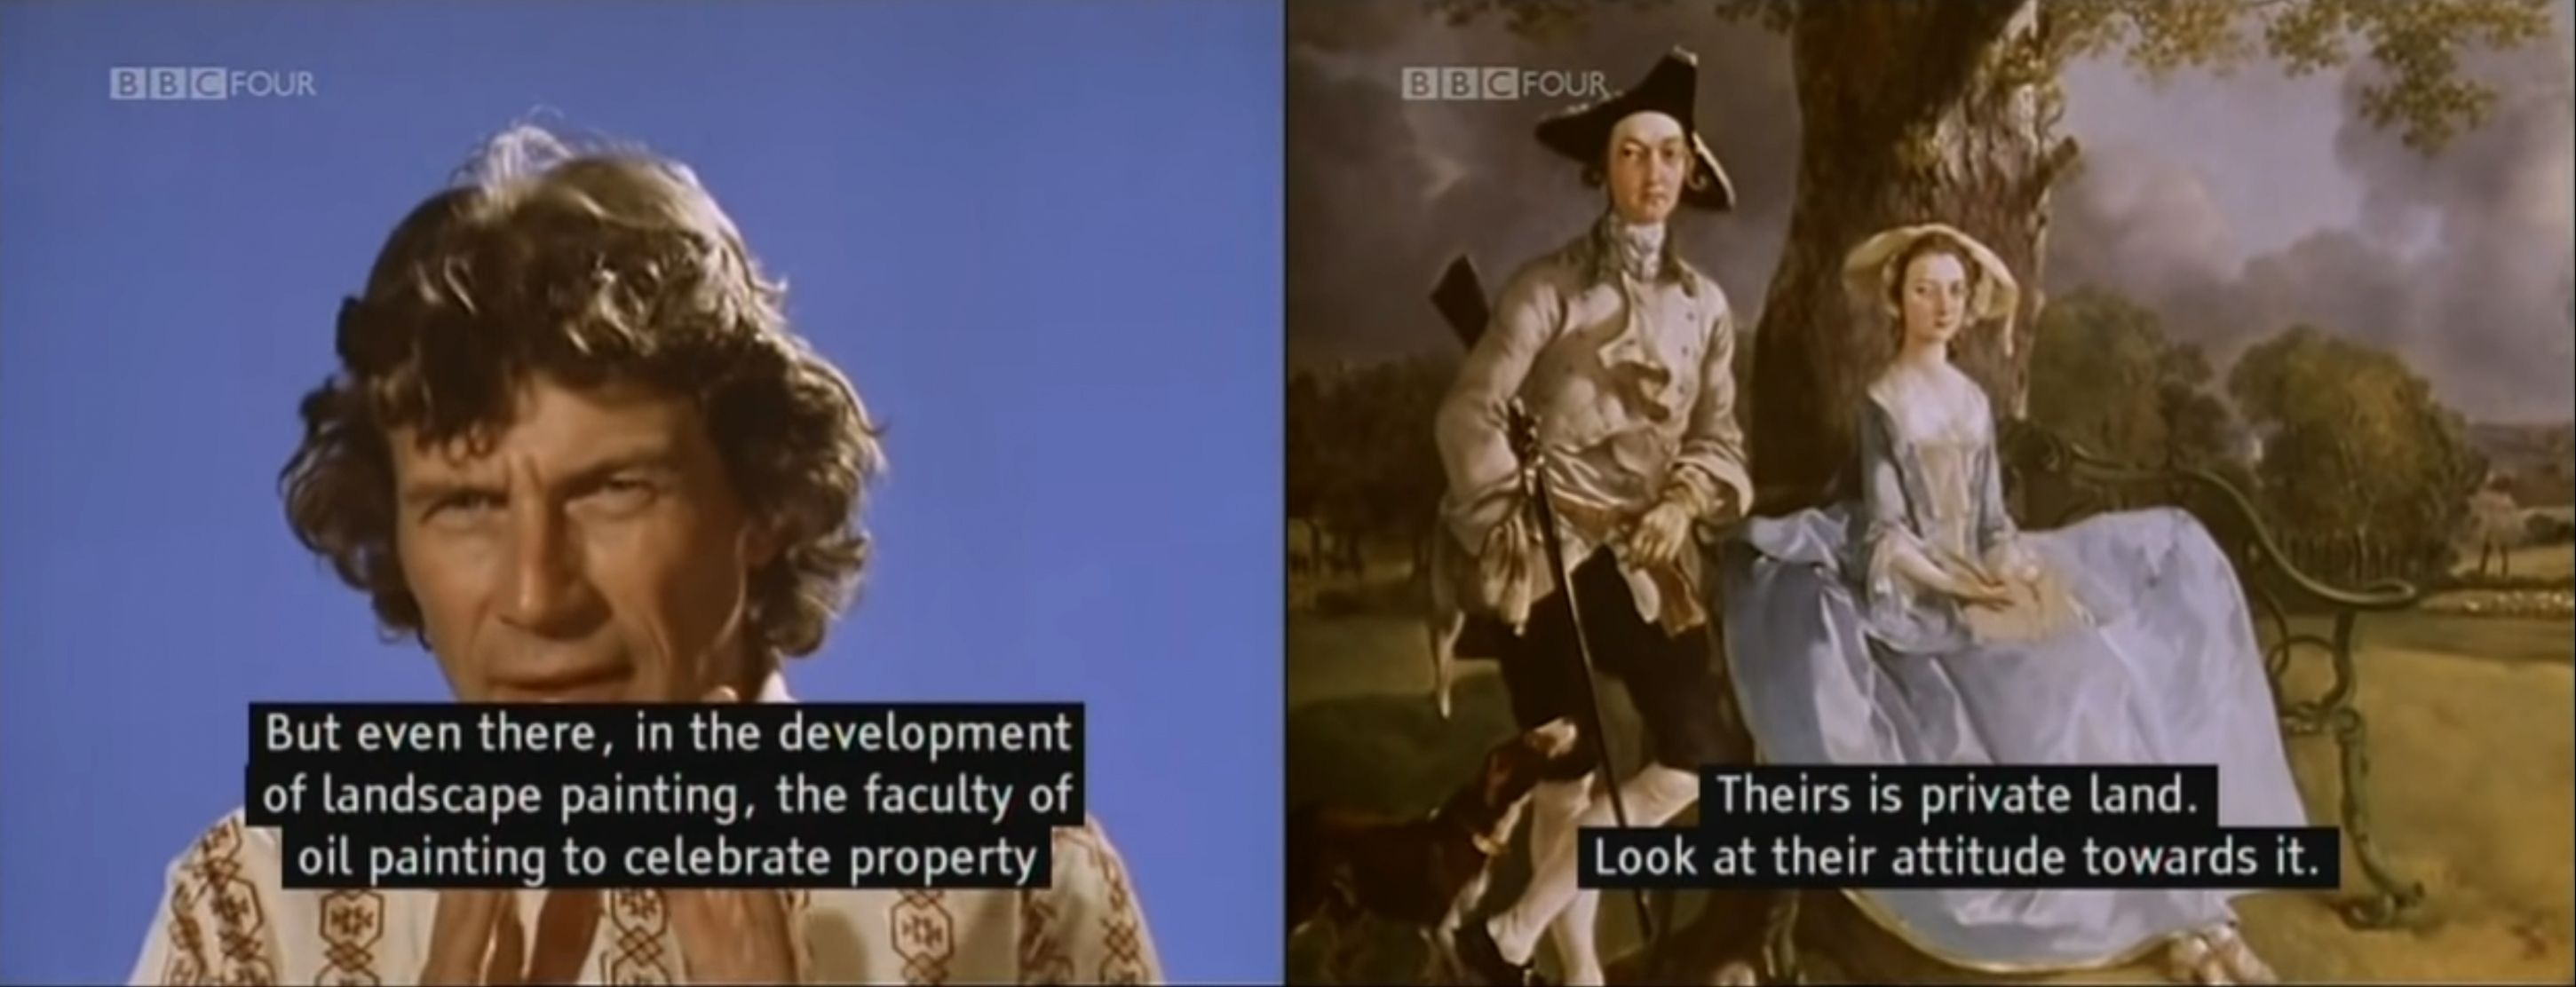 John Berger in “Ways of Seeing” on BBC (1972) —“Mrs and Mrs Andrews” by Thomas Gainsburough, about 1750